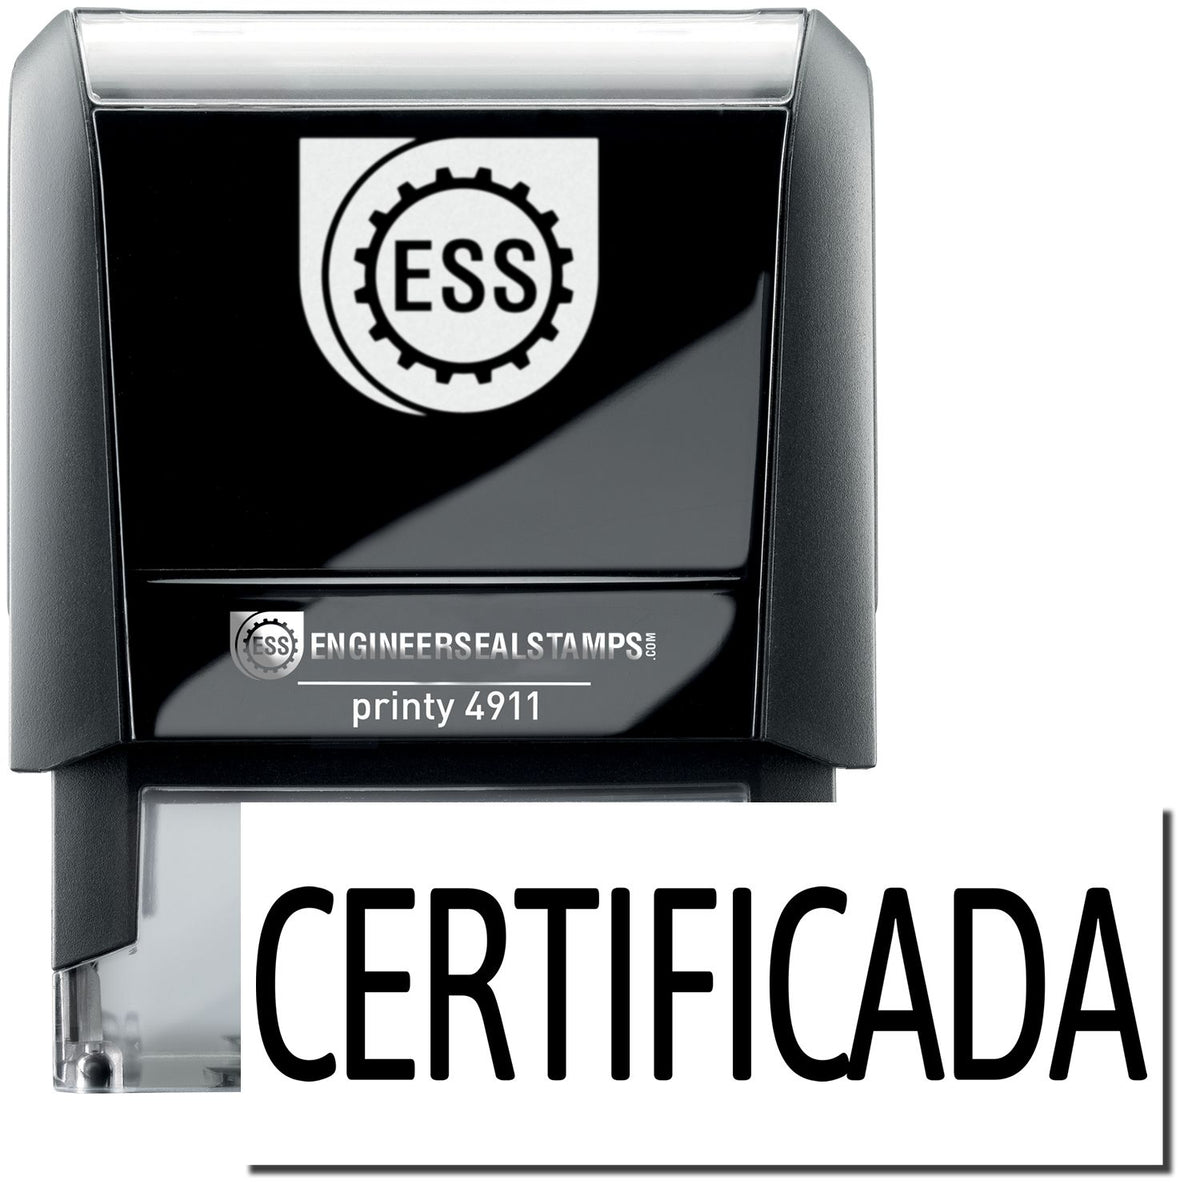 A self-inking stamp with a stamped image showing how the text &quot;CERTIFICADA&quot; is displayed after stamping.